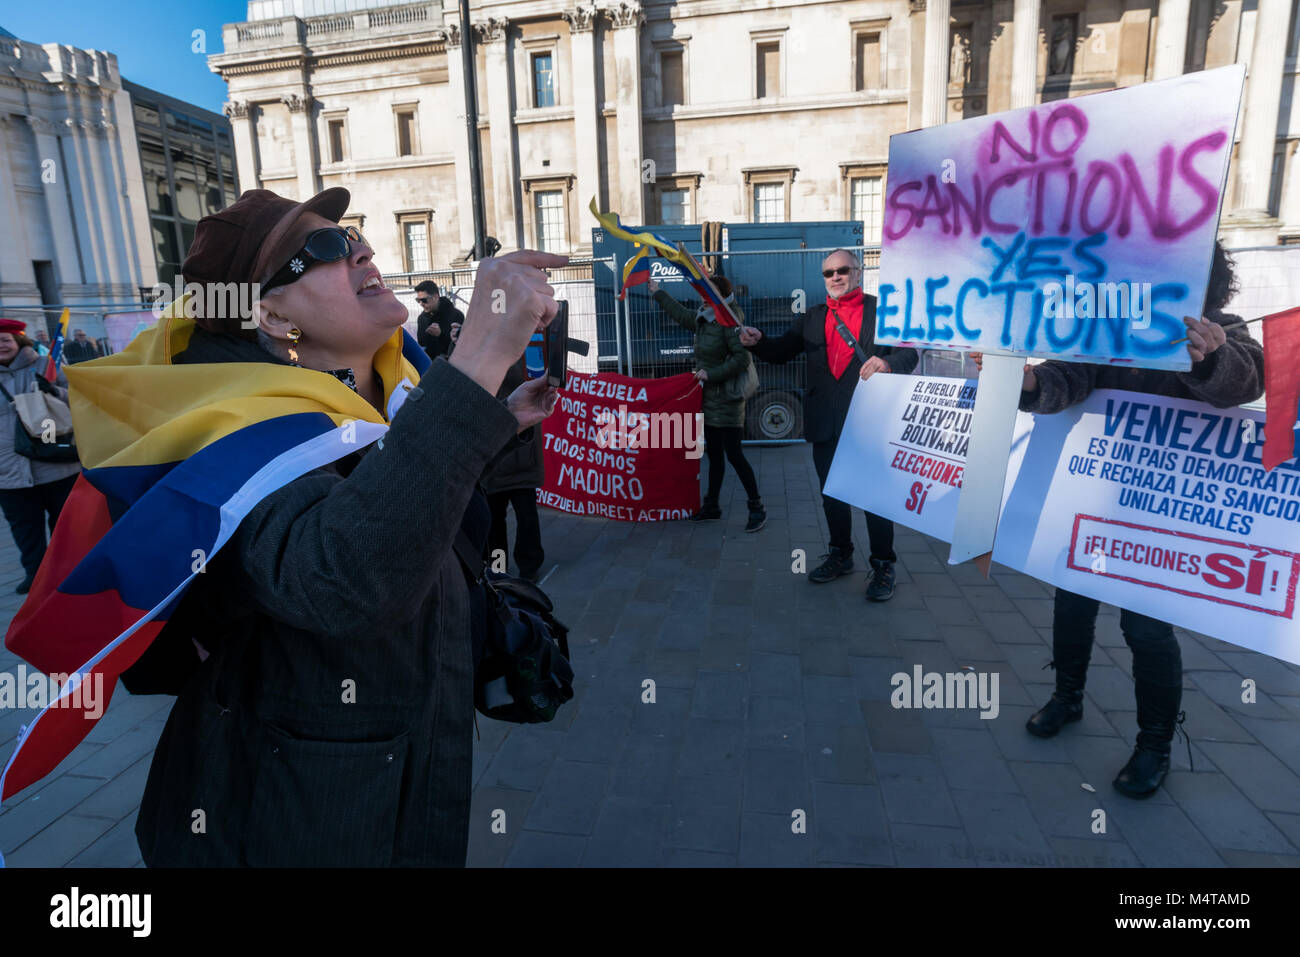 February 17, 2018 - London, UK. 17th February 2018. An emergency rally in Trafalgar Square calls of an end to EU and US economic and diplomatic sanctions against Venezuela in support of the interests of international corporations which make it difficult for the country to recover after the collapse of oil prices in 2015. The latest attack on the country is the US rejection of the 22nd April 2018 election, an attack on Venezuelan sovereignty and the country's right to determine its own destiny. Two women carrying upside-down Venezuelan flags came to interrupt the protest and shout at the prote Stock Photo